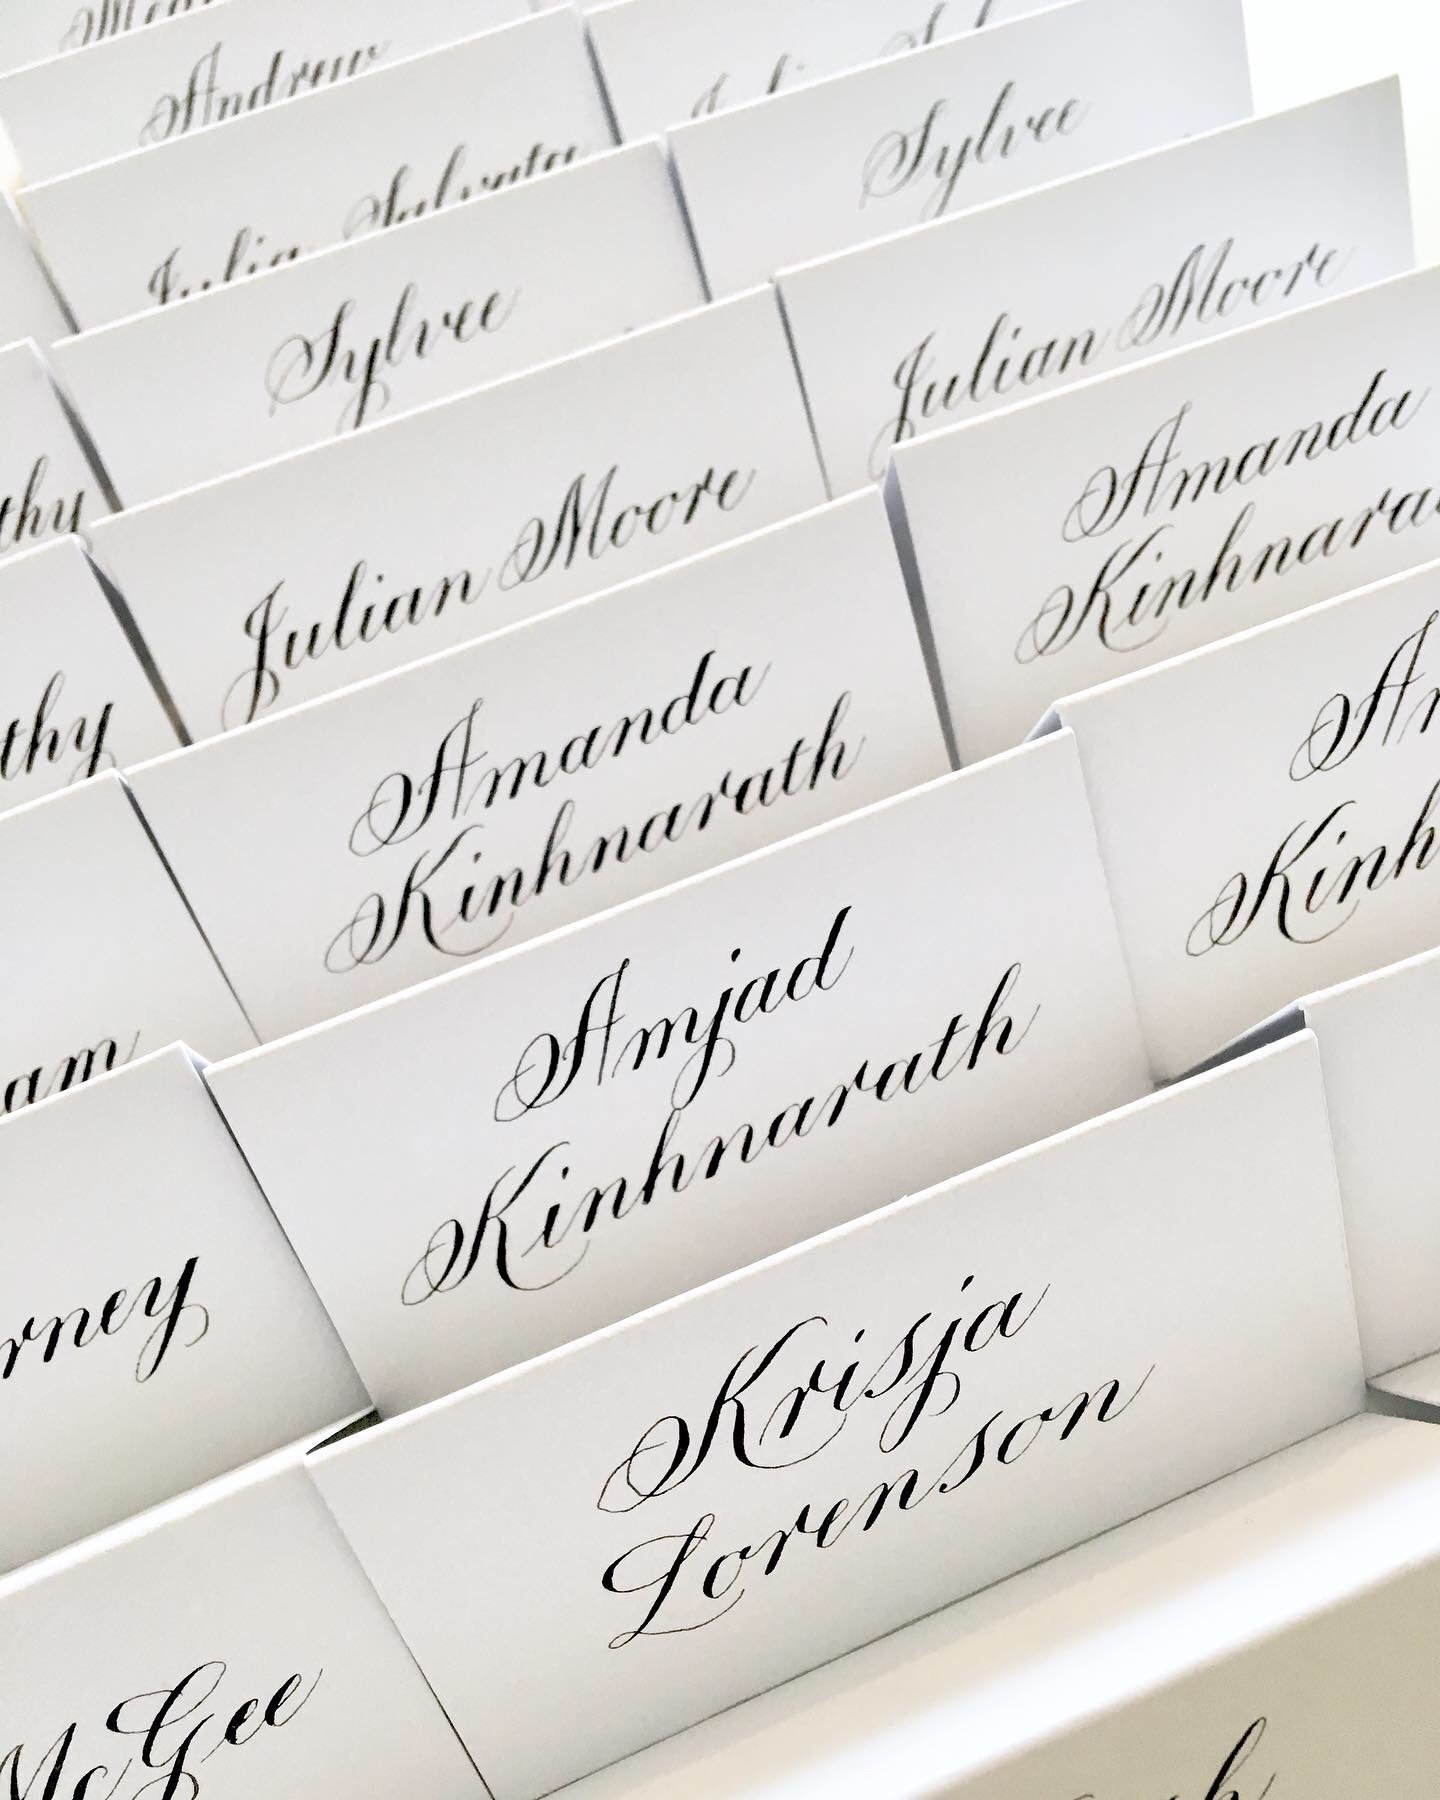 Black ink Copperplate calligraphy on white place cards